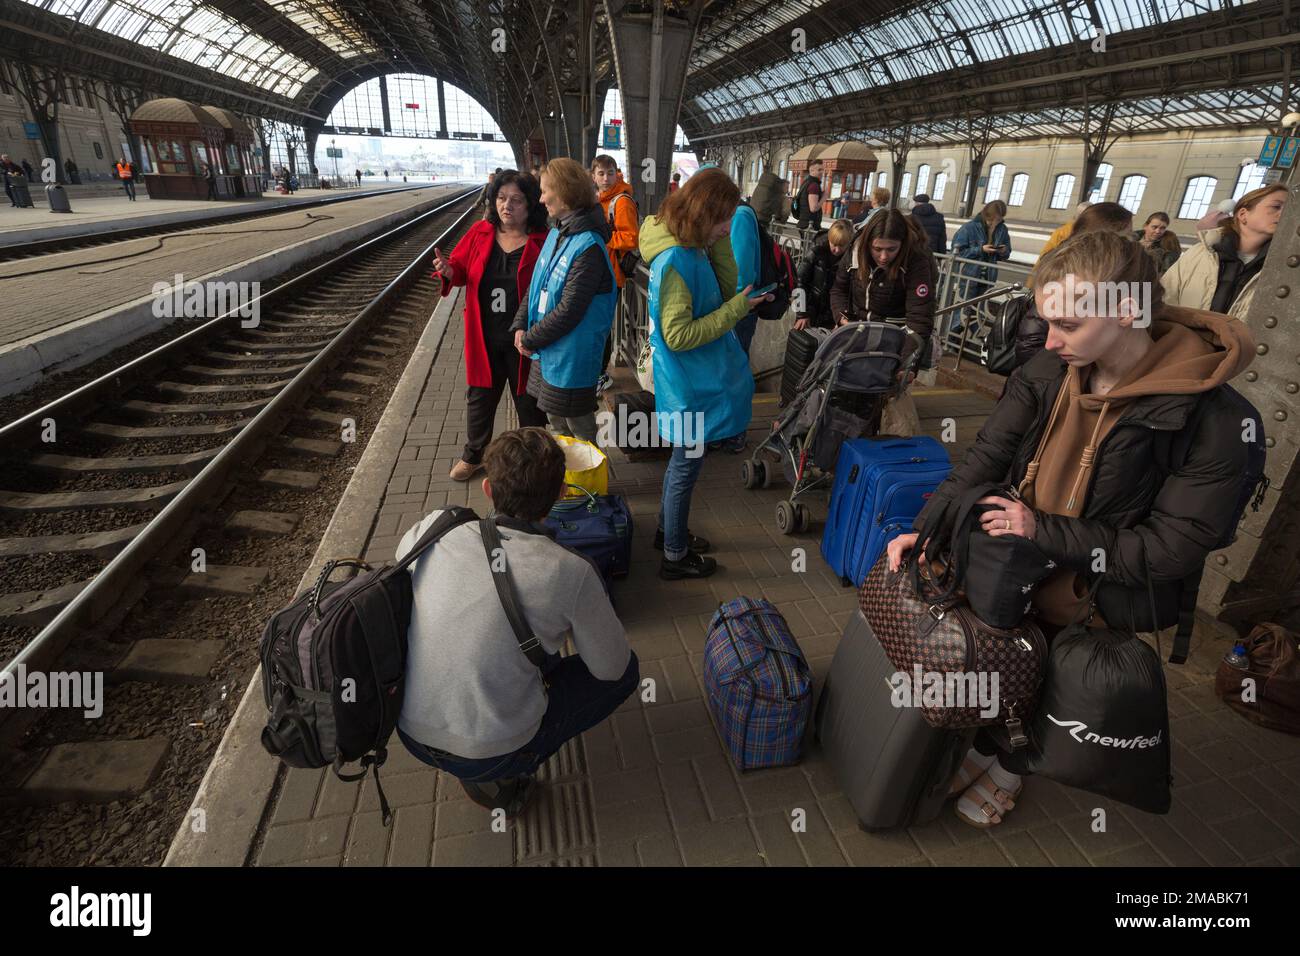 15.04.2022, Ukraine, Oblast, Lviv - Ukrainian war refugees are received and cared for by volunteers on the platform at the main train station. Attenti Stock Photo